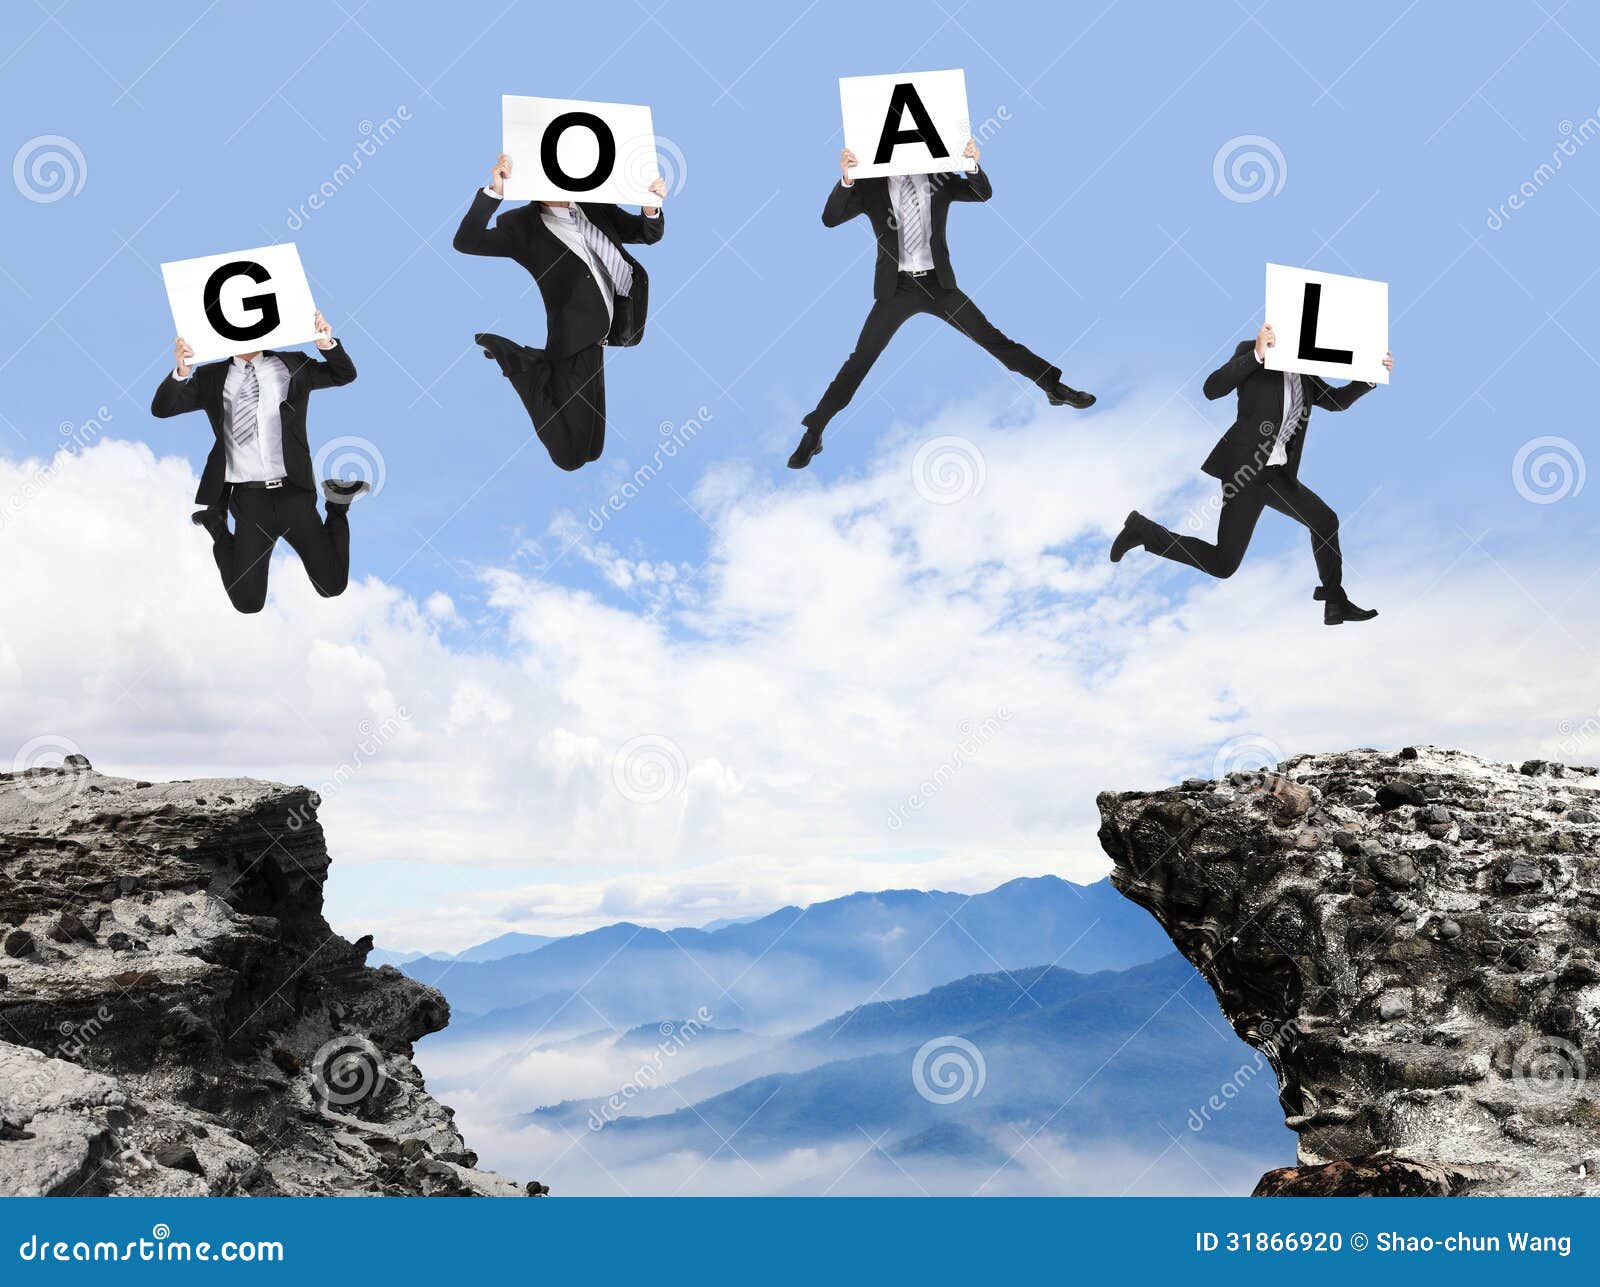 businessman jumping with goal text on danger precipice